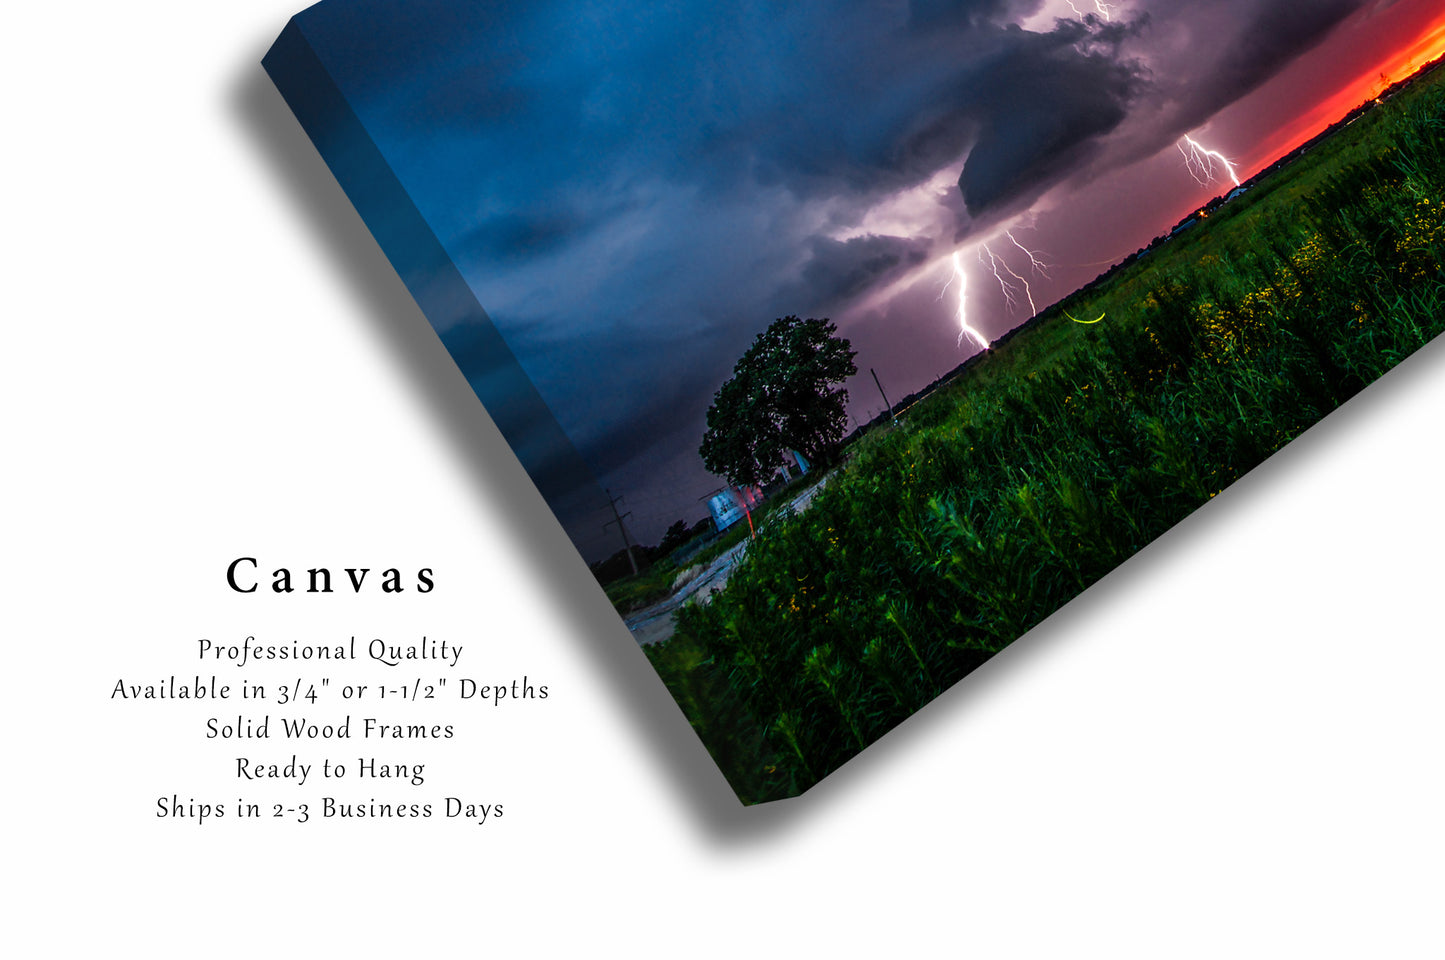 Storm Canvas Print | Lightning Bolts and Firefly at Sunset Wall Art | Oklahoma Photography | Thunderstorm Photo | Weather Decor